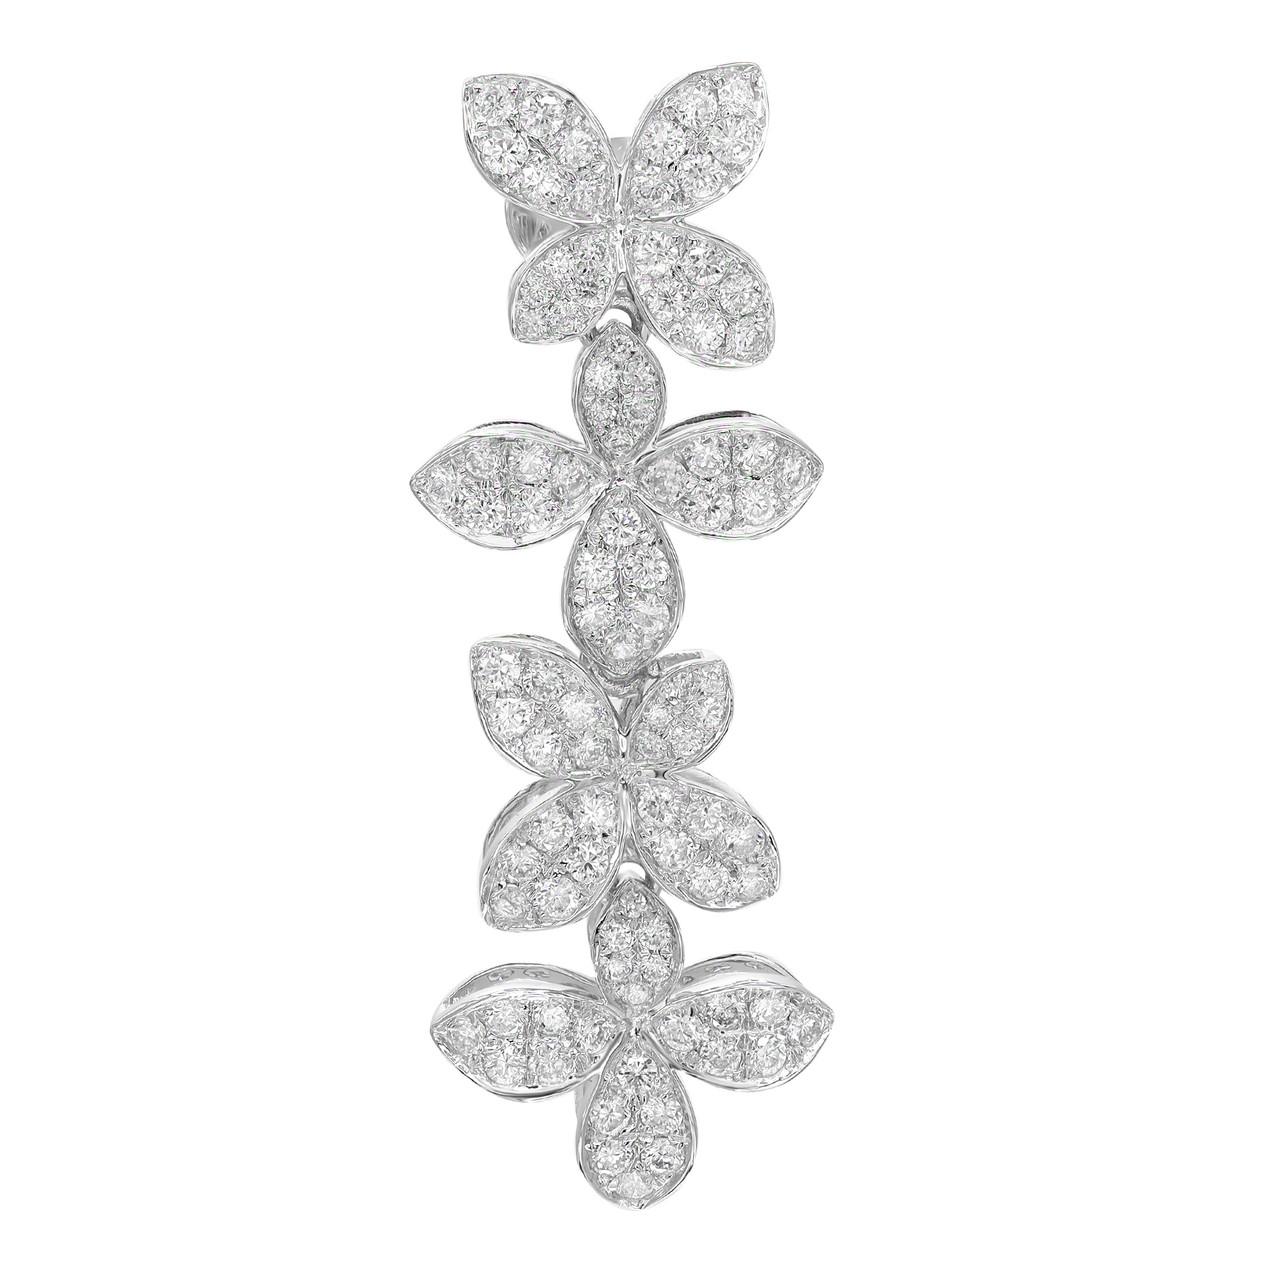 Discover the epitome of elegance with our 2.00 Carat Flower Diamond Drop Earrings in exquisite 18K White Gold, featuring a graceful arrangement of four intricately crafted flowers. Adorned with a total of 2.00 carats of brilliant diamonds, these